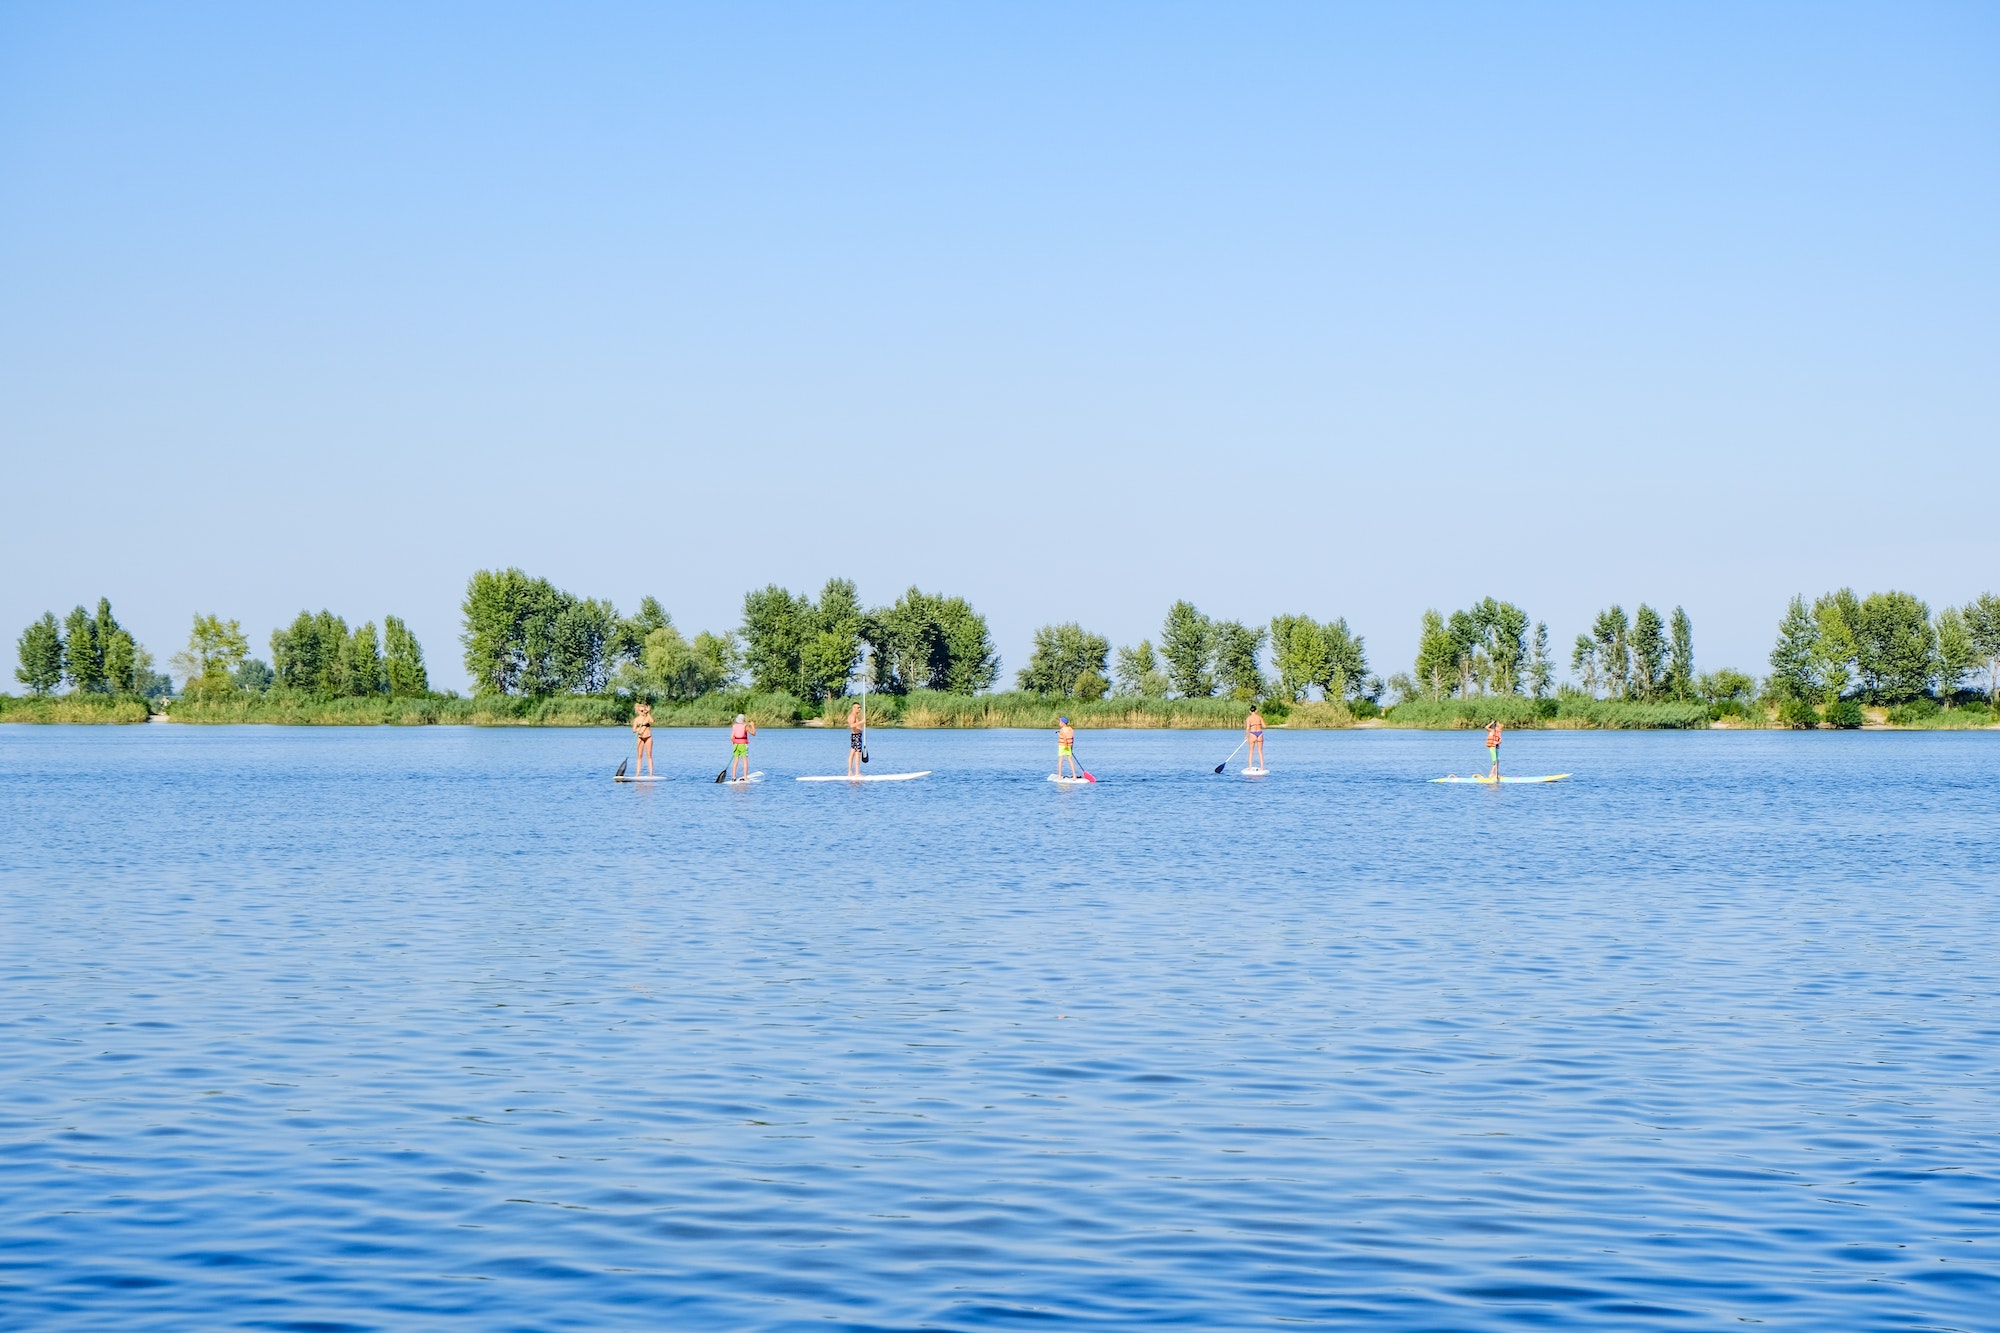 Summer water sports. Sup boarding and surfing. Outdoor activity. Competitions. Bank of the river.